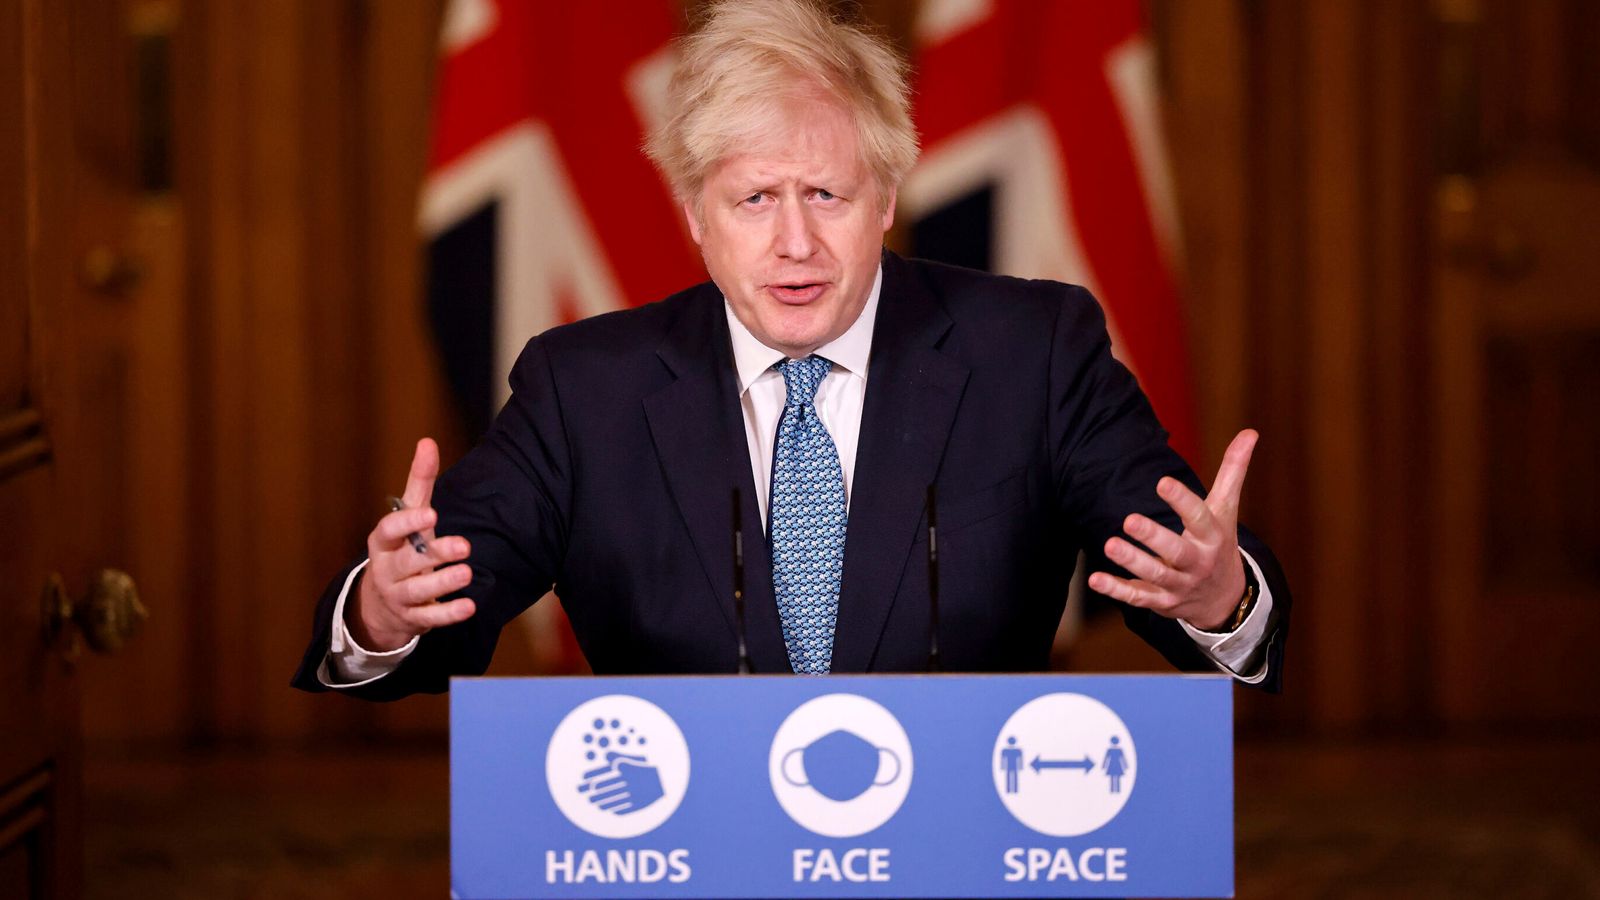 COVID inquiry: Boris Johnson blames NHS 'bed blocking' on need for first lockdown